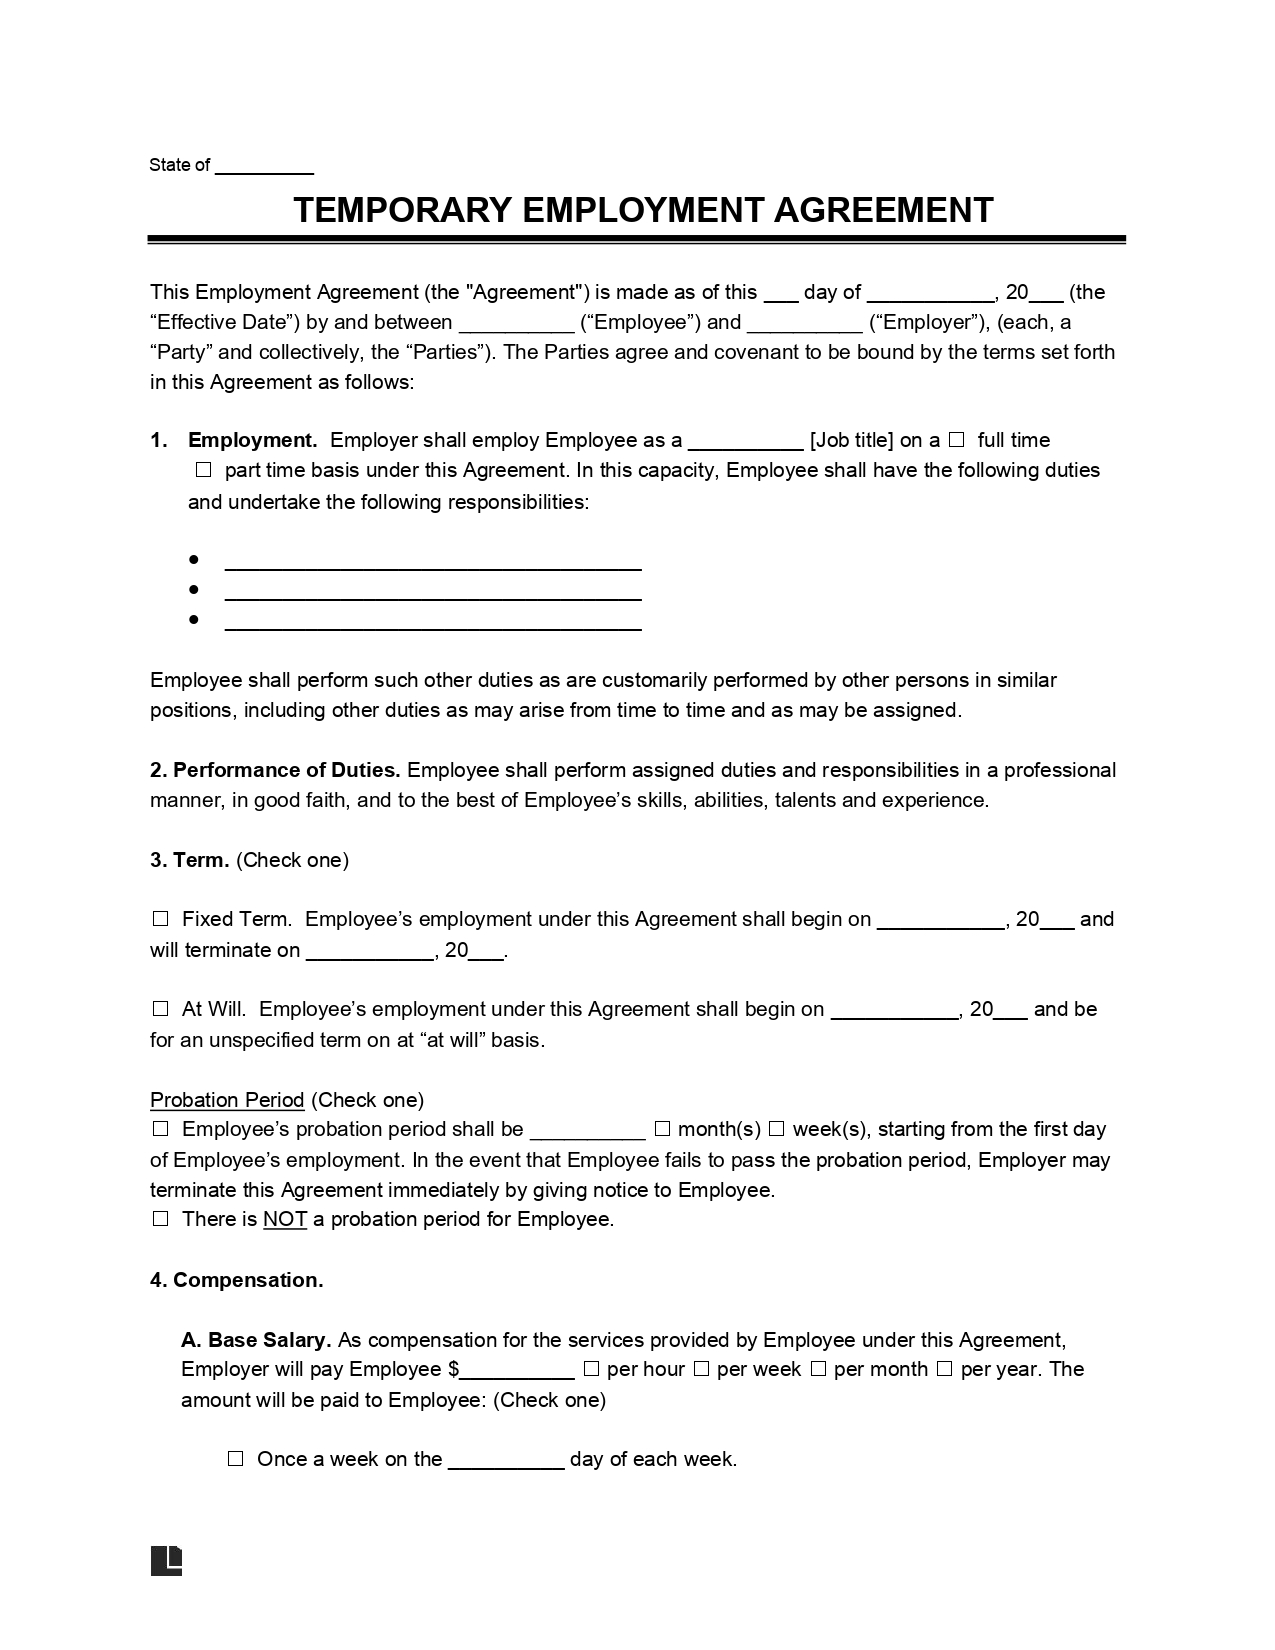 Temporary Employment Agreement Preview